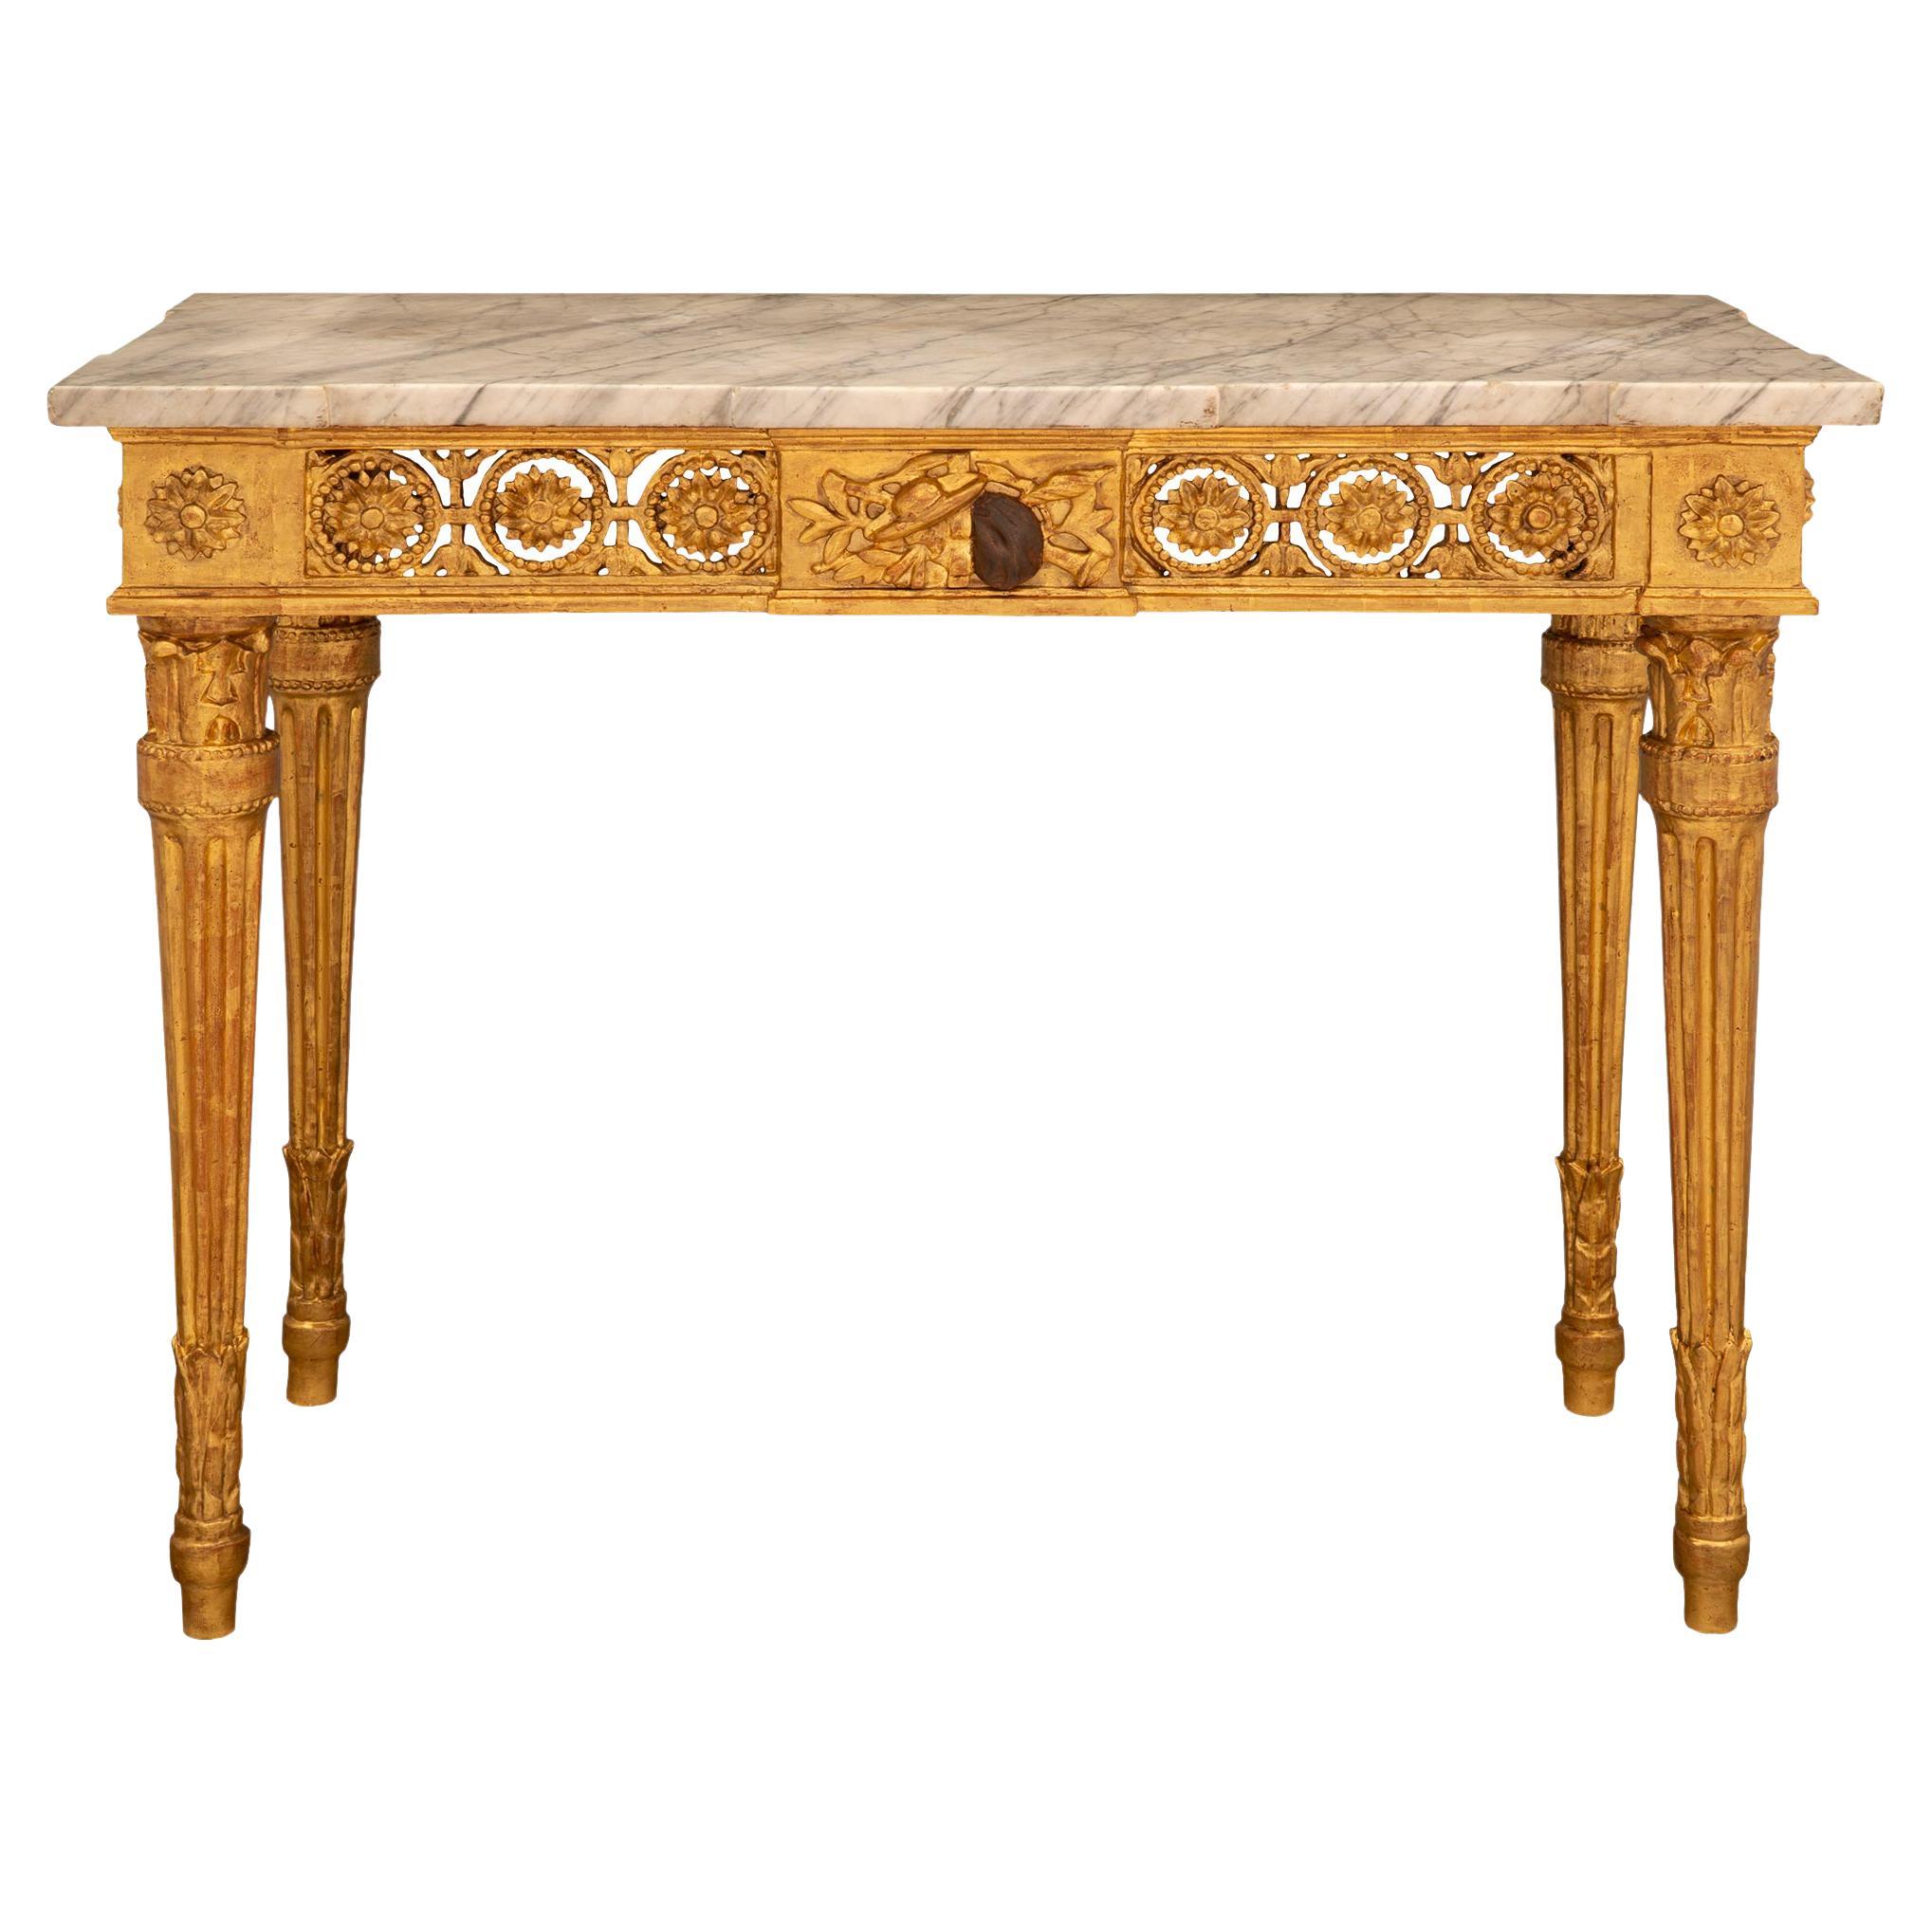 Italian 18th Century Louis XVI Period Giltwood, Polychrome and Marble Console For Sale